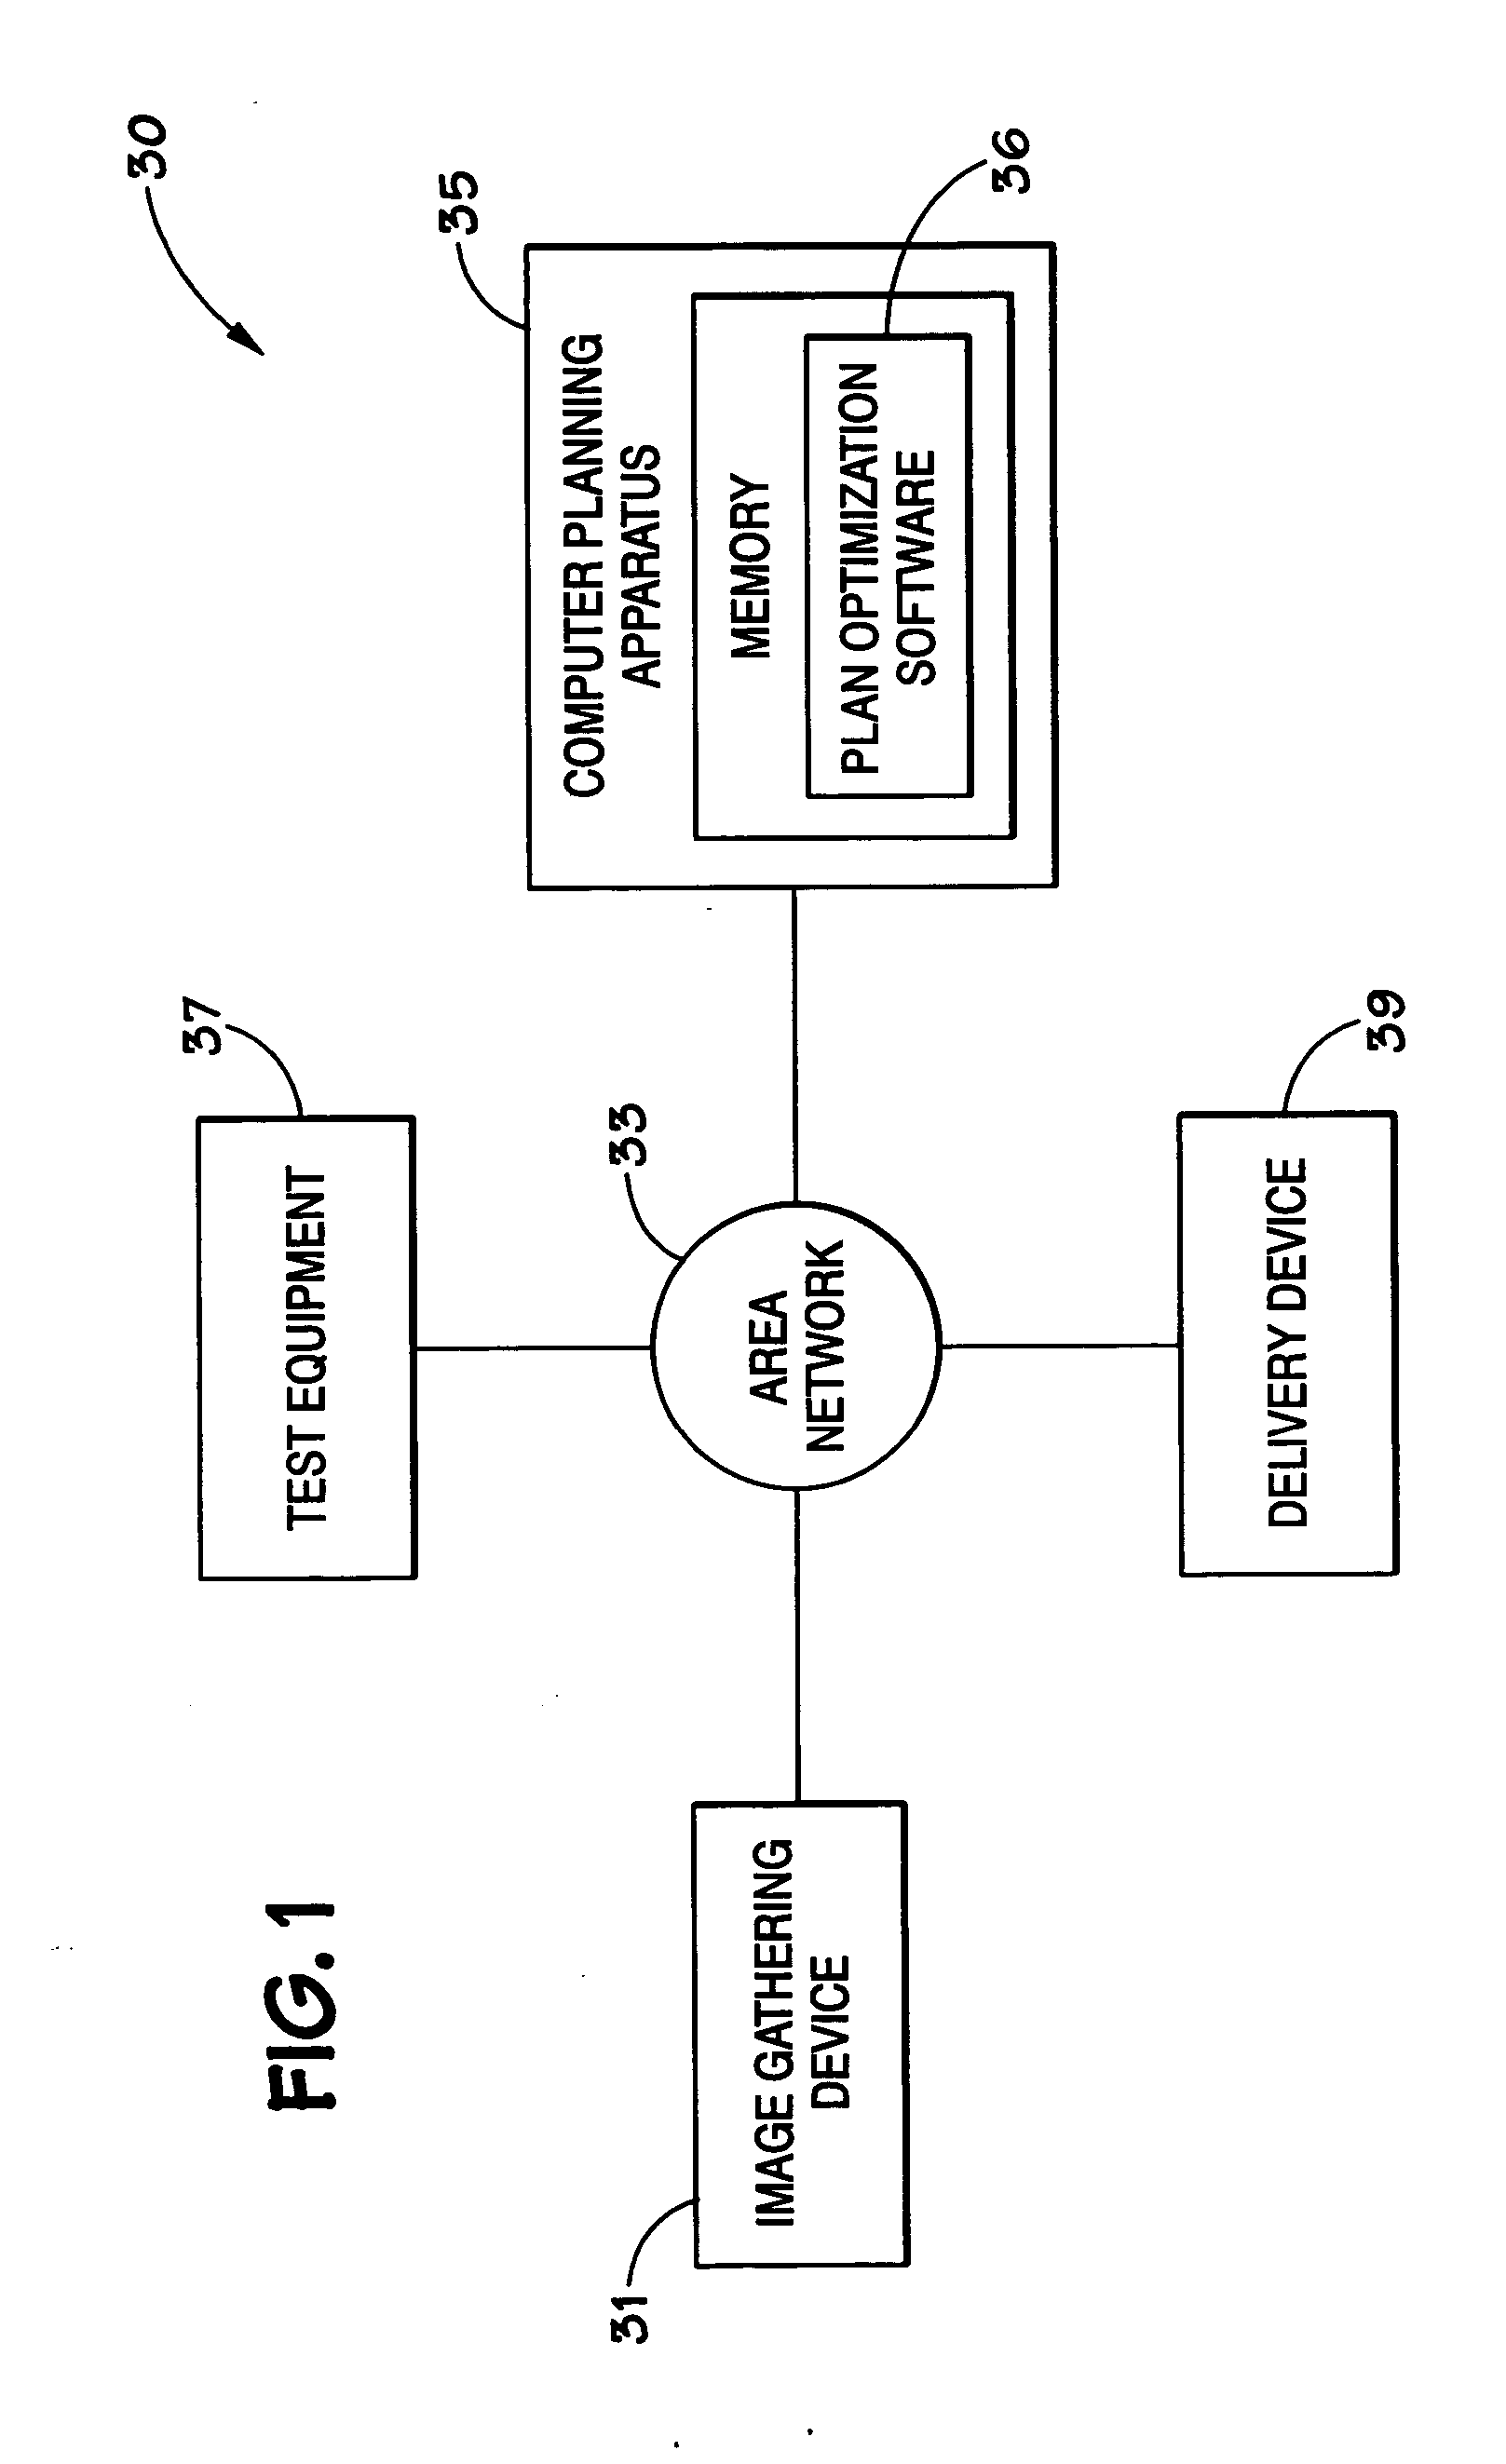 Planning system, method and apparatus for conformal radiation therapy